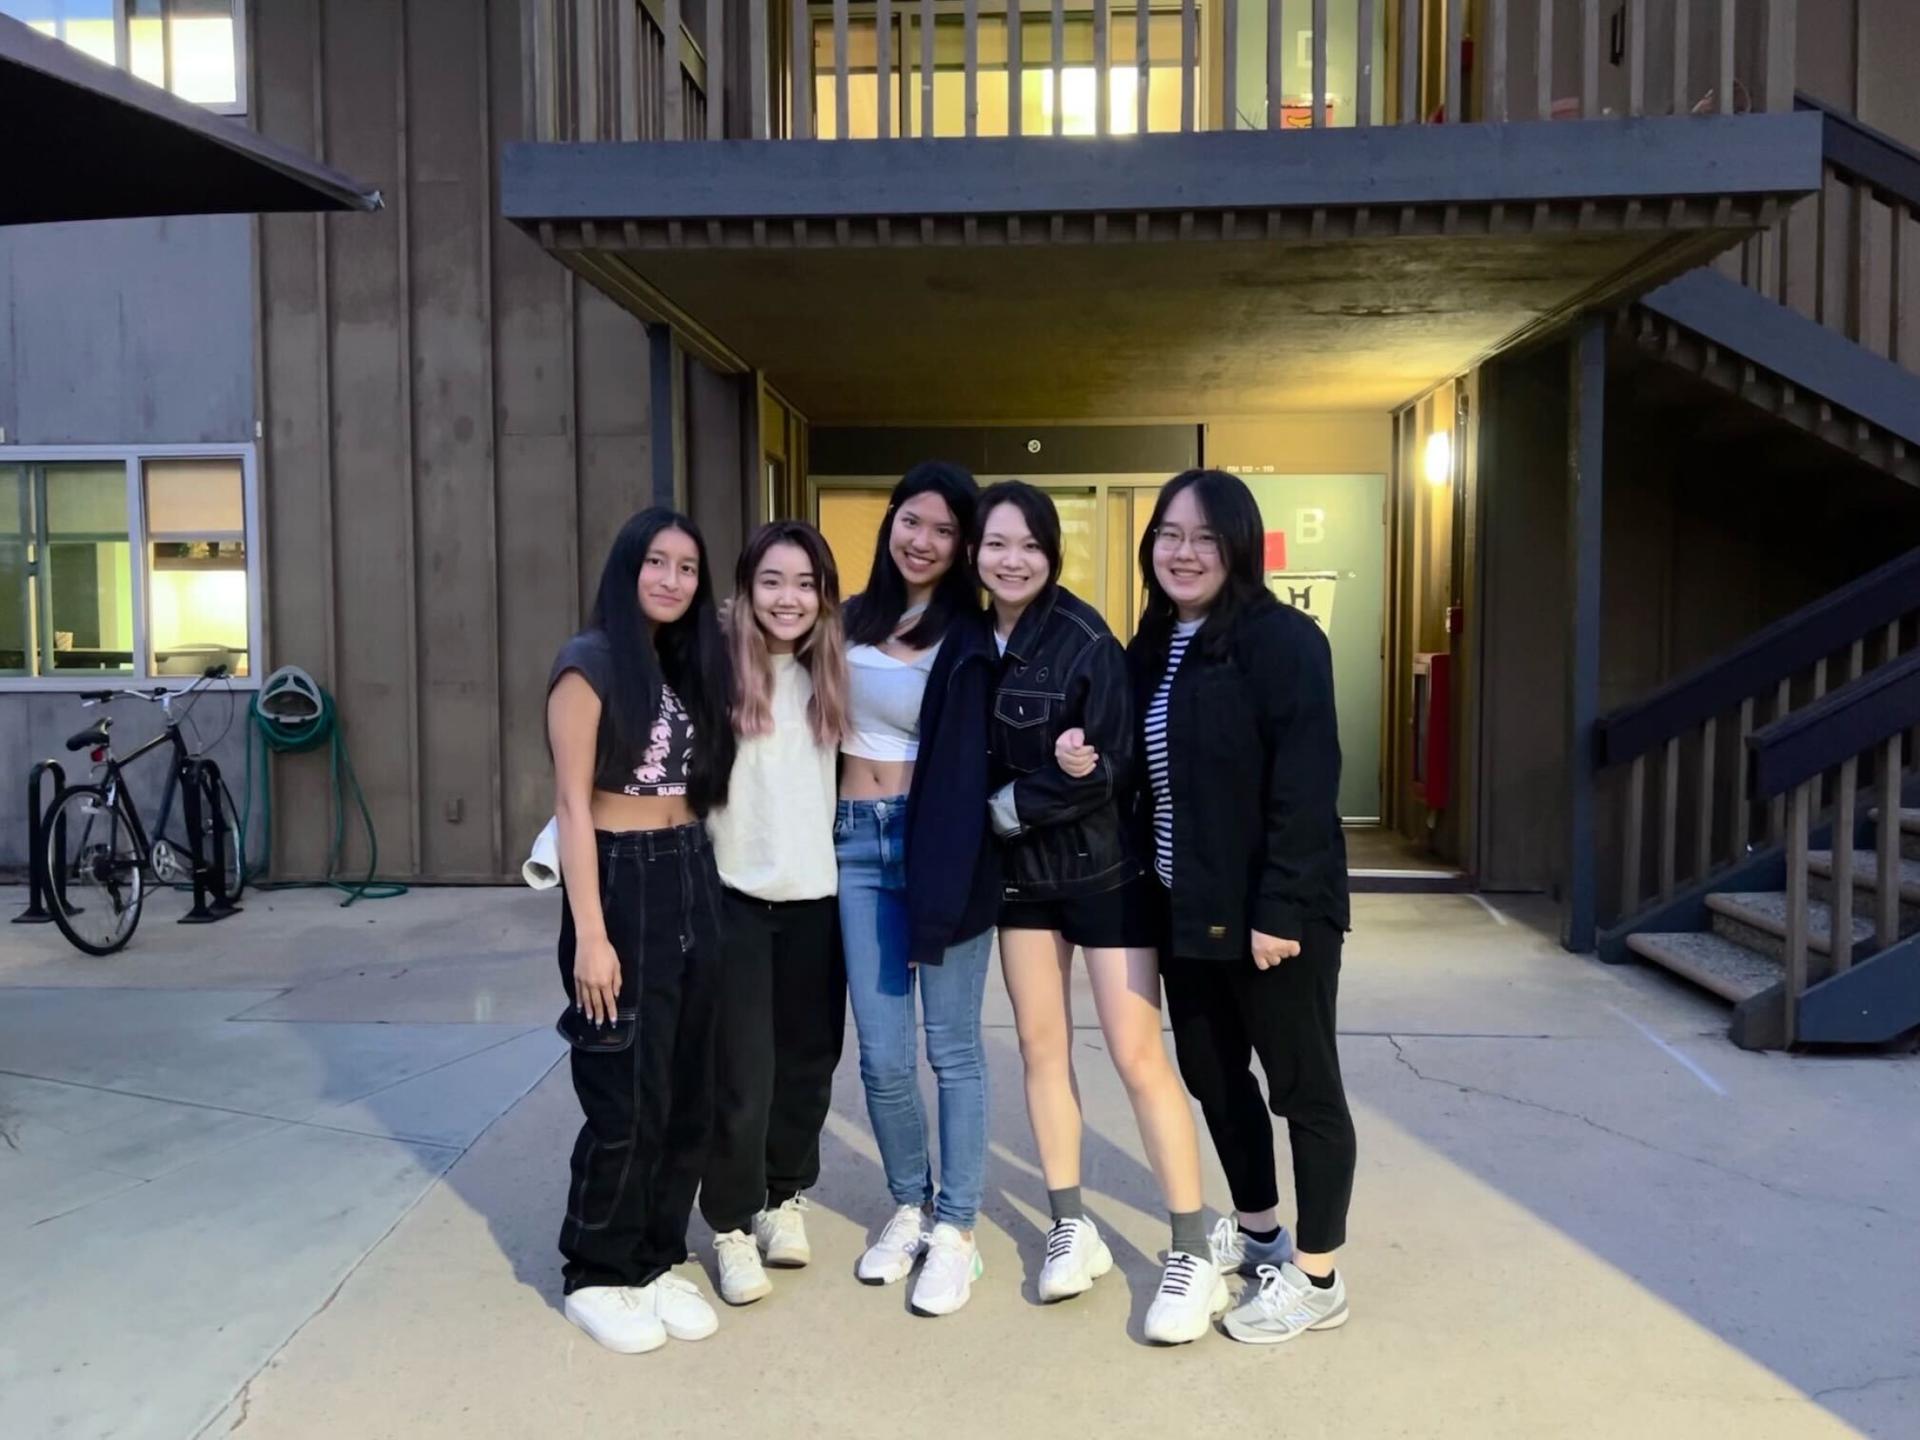 Tianrui Huang (center) with her friends at UC San Diego, June 2022.